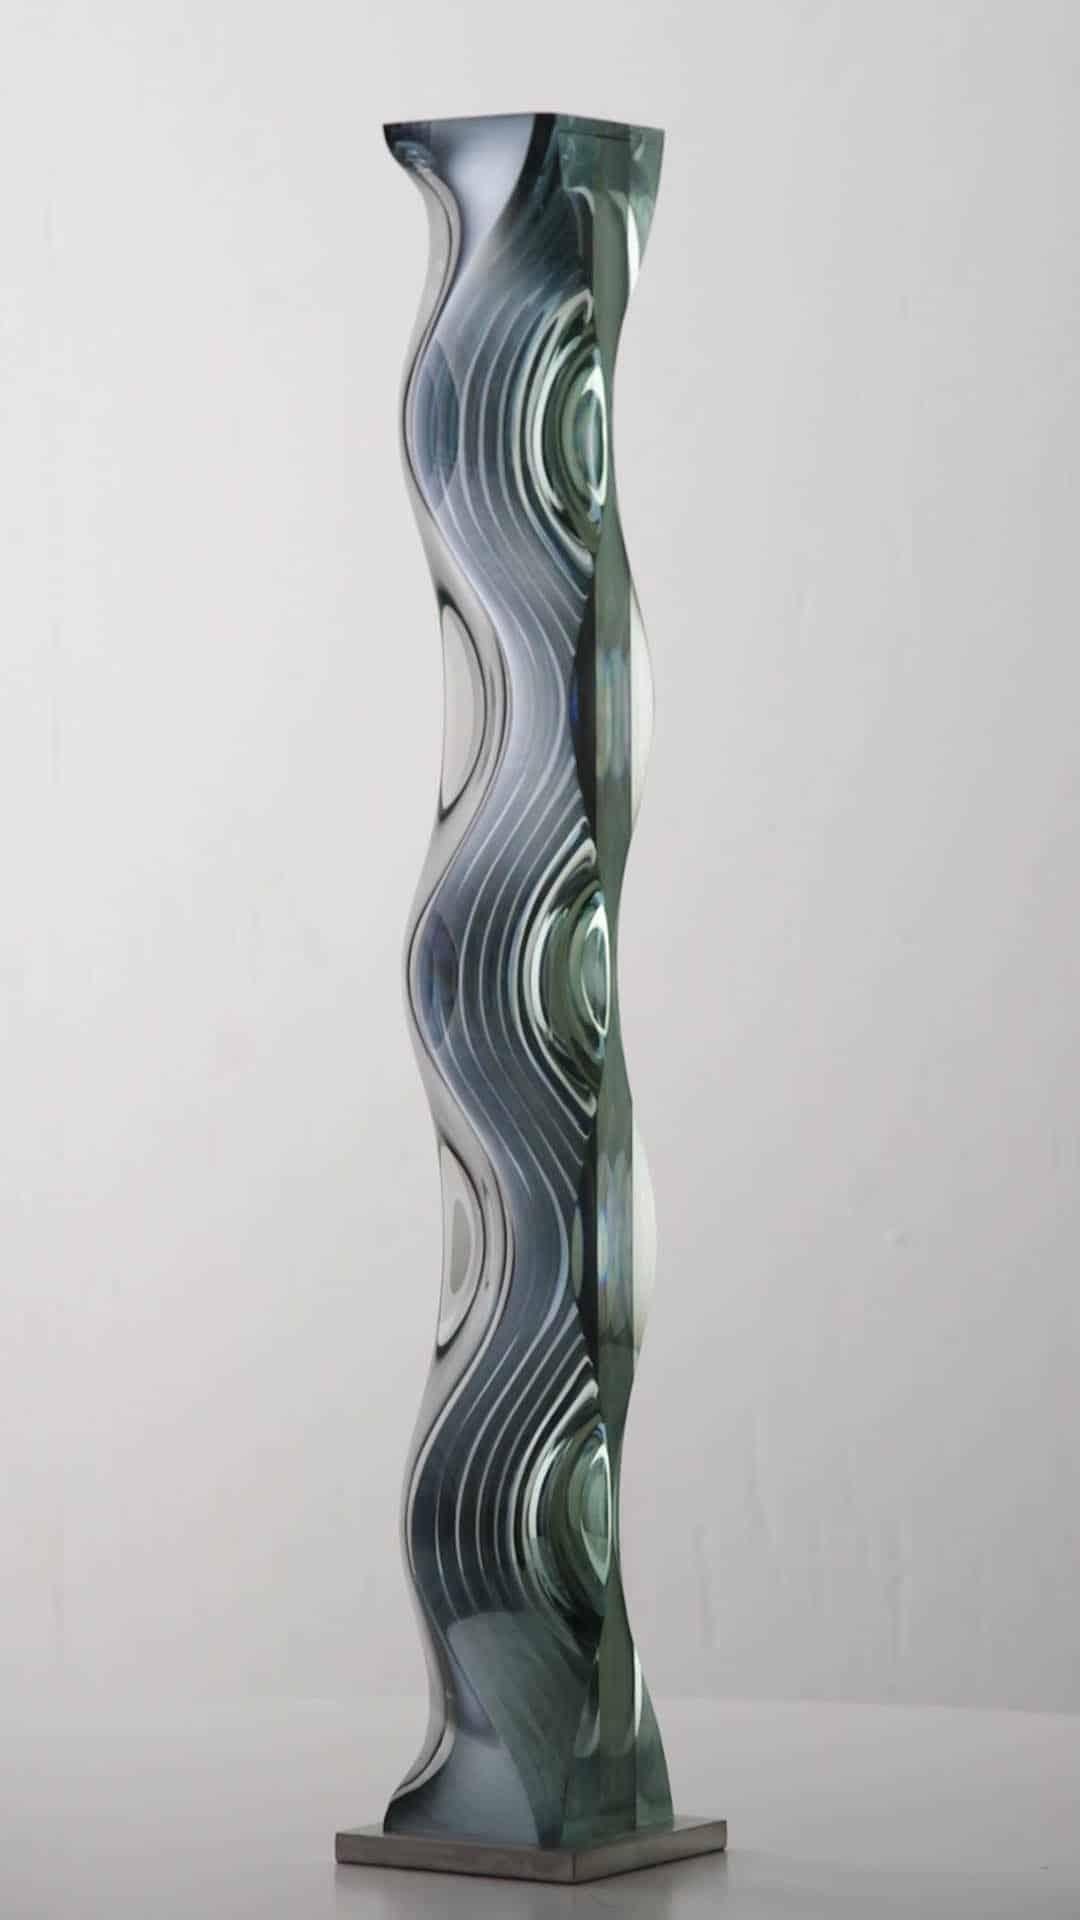 M.180601 by Toshio Iezumi - Contemporary glass sculpture, green, abstract For Sale 4